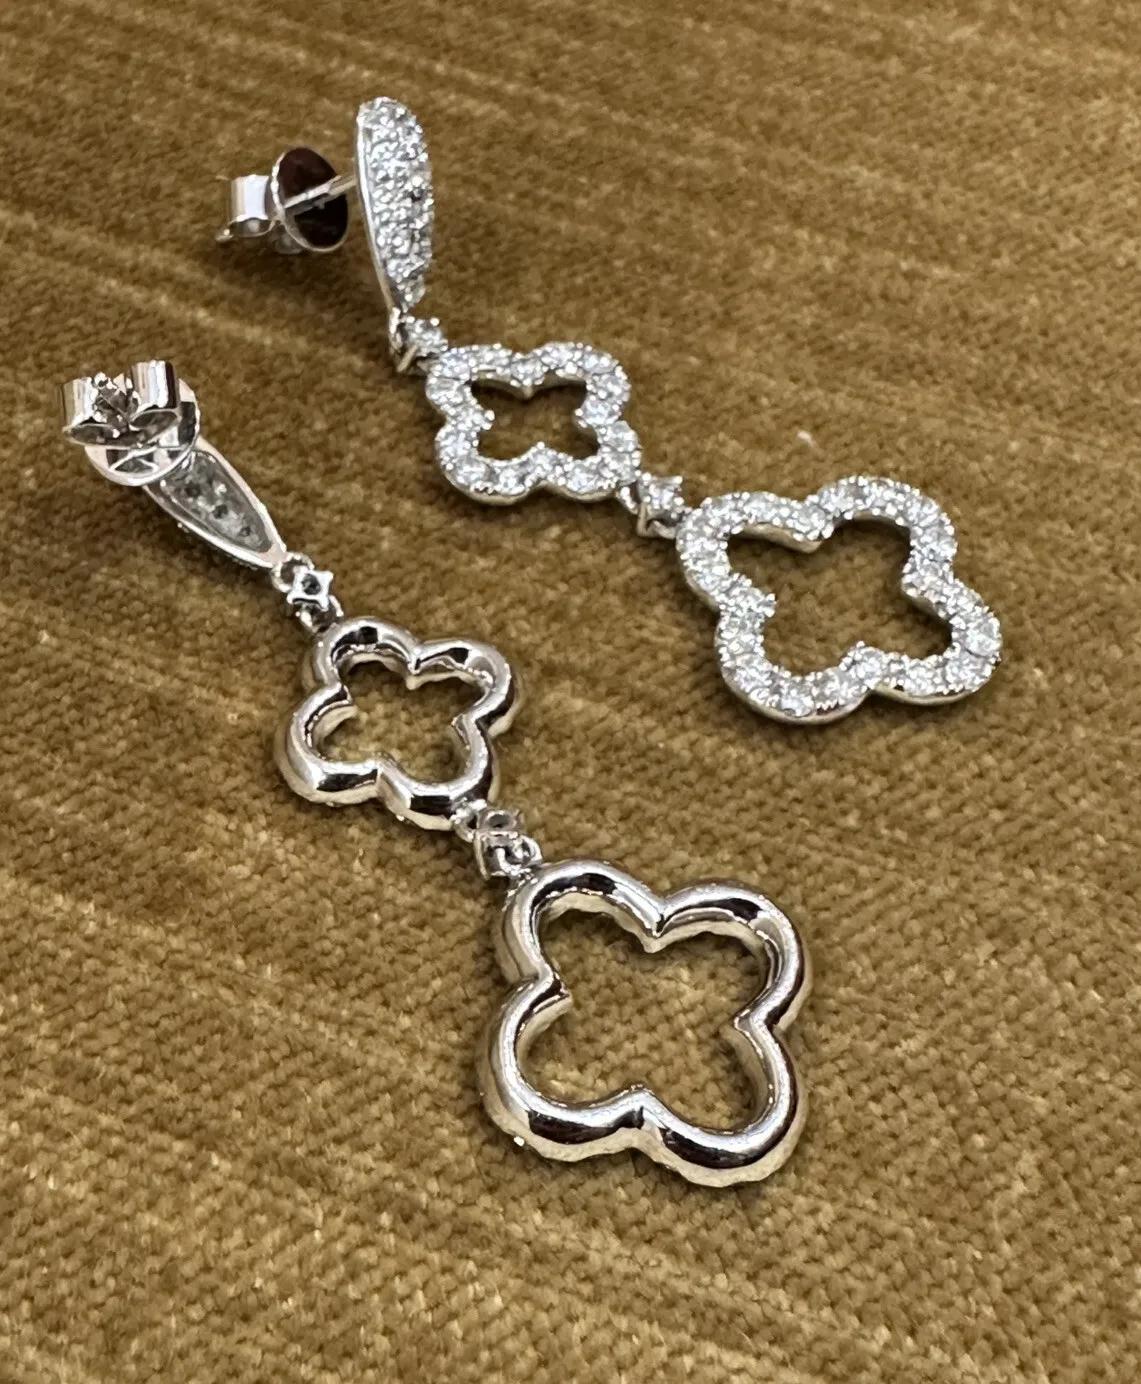 Diamond Clover Drop Earrings 3.44 Carat Total Weight in 18k White Gold In Excellent Condition For Sale In La Jolla, CA